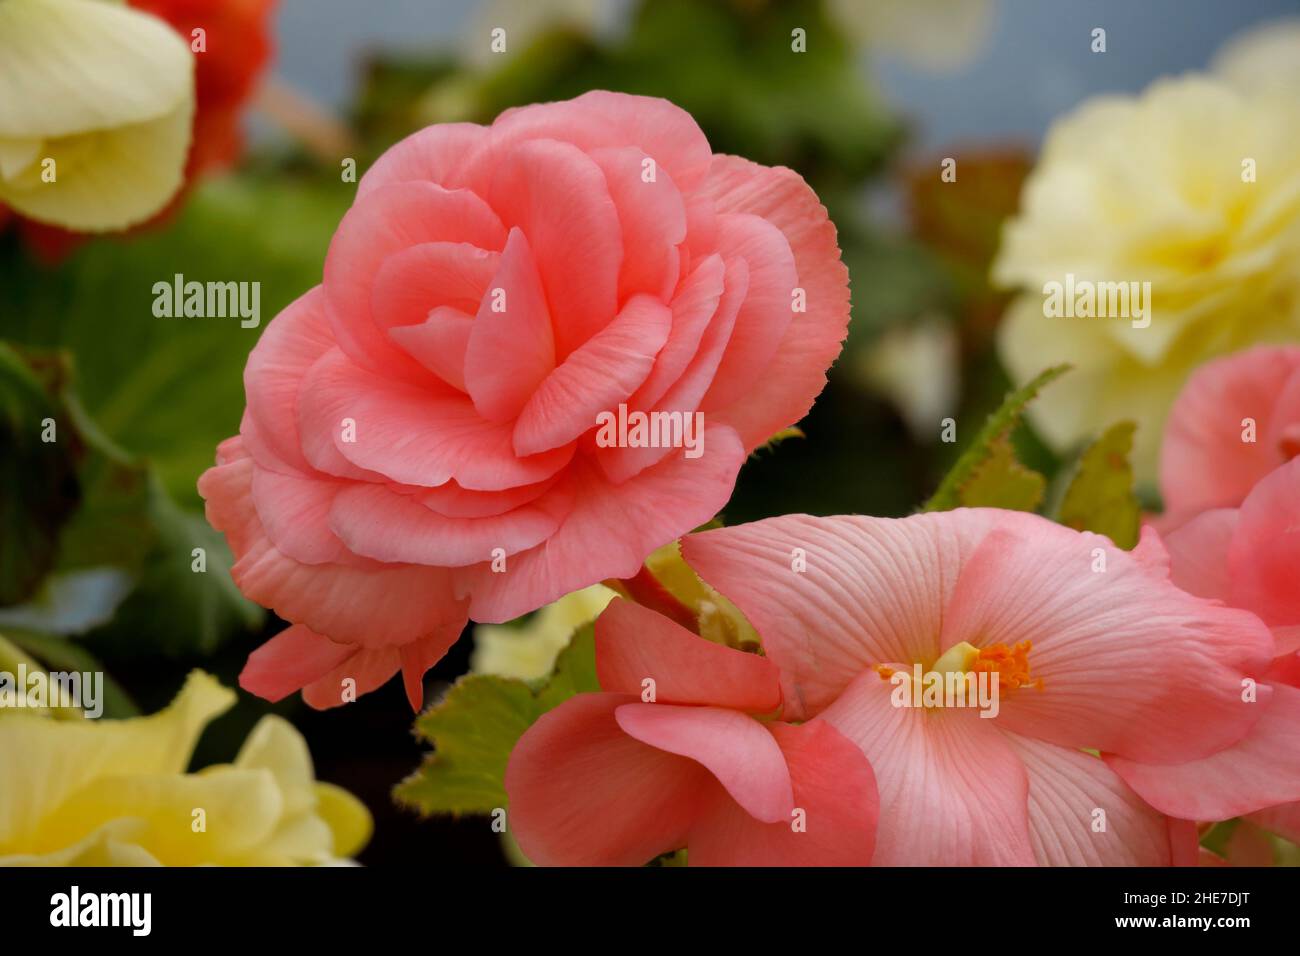 Light Pink and Yellow Begonias, Tuberous Begonia Flowers, Double Fully Bloomed in a Garden Stock Photo